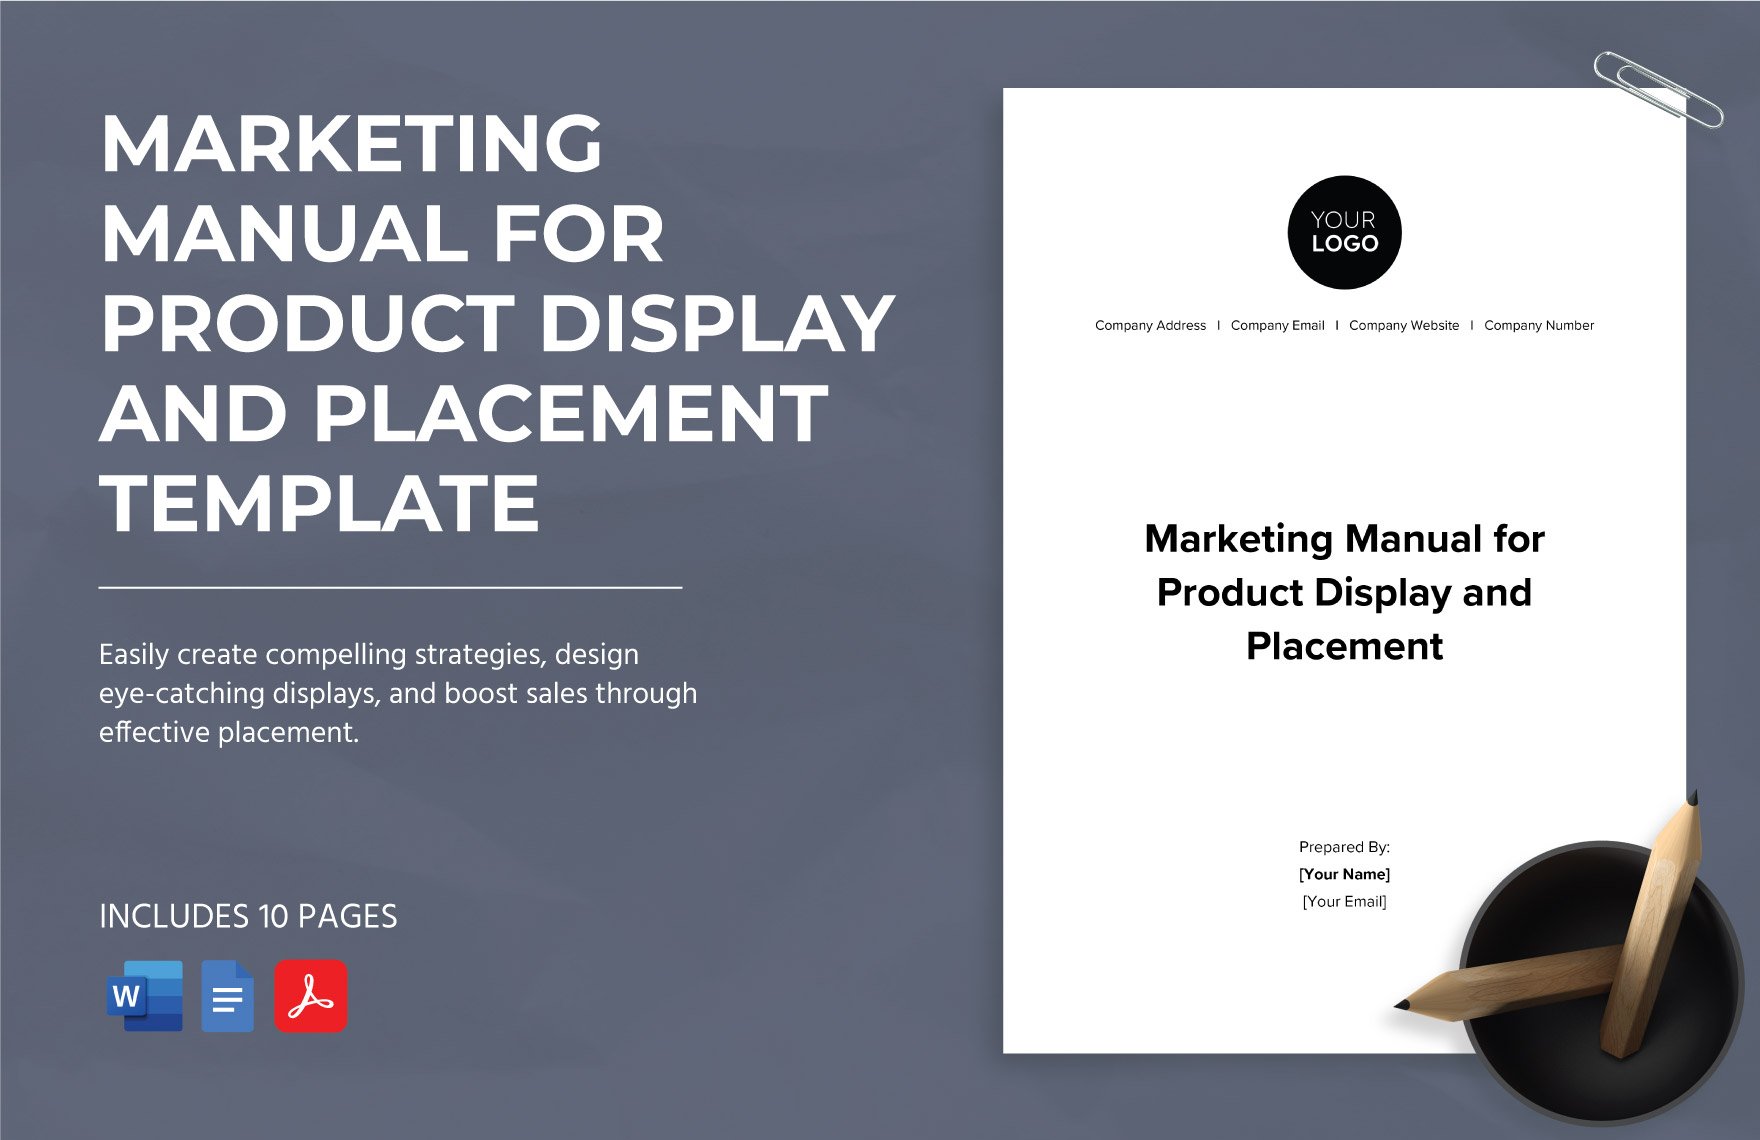 Marketing Manual for Product Display and Placement Template in Word